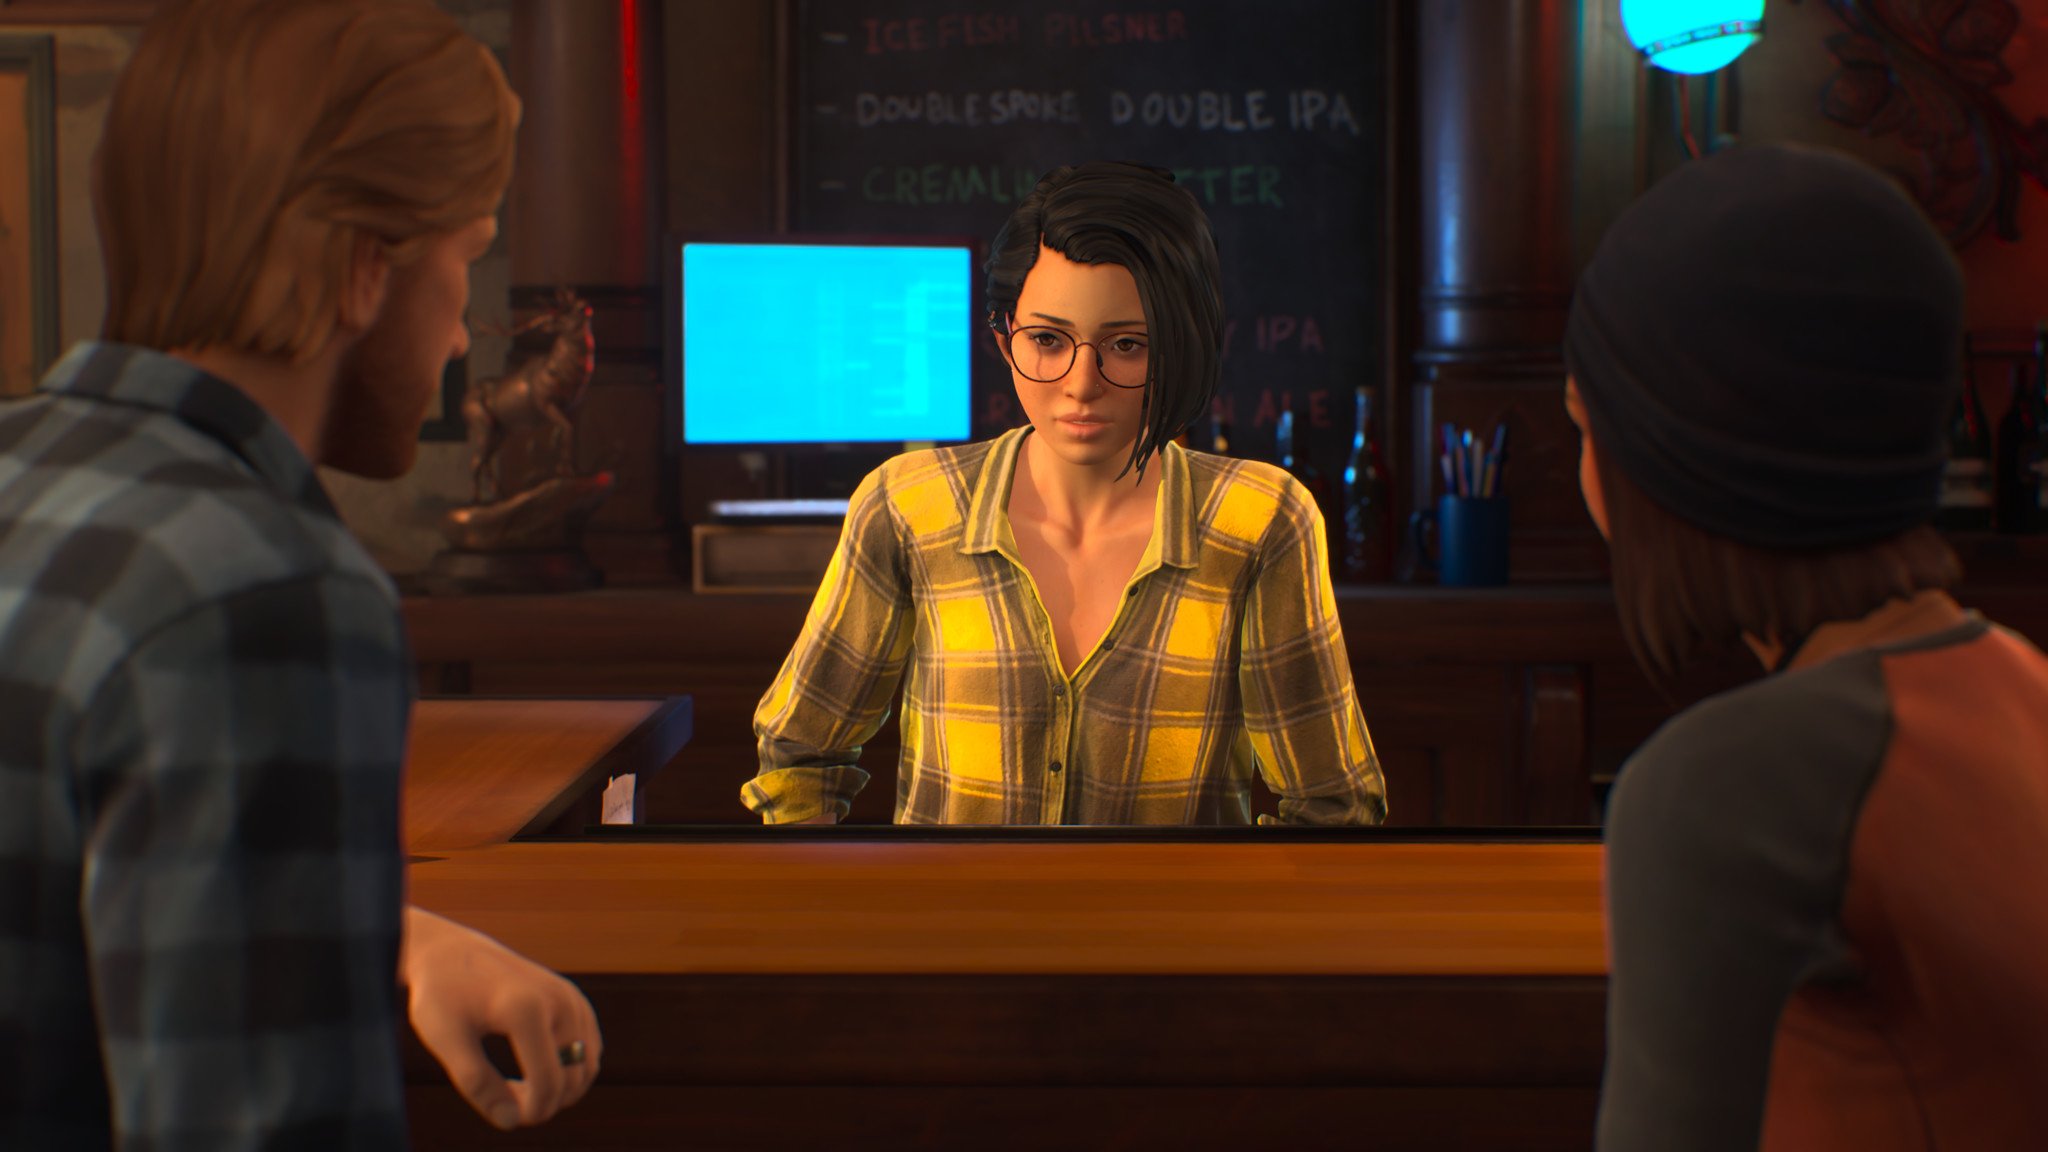 Life Is Strange: True Colors Review - Shining Through